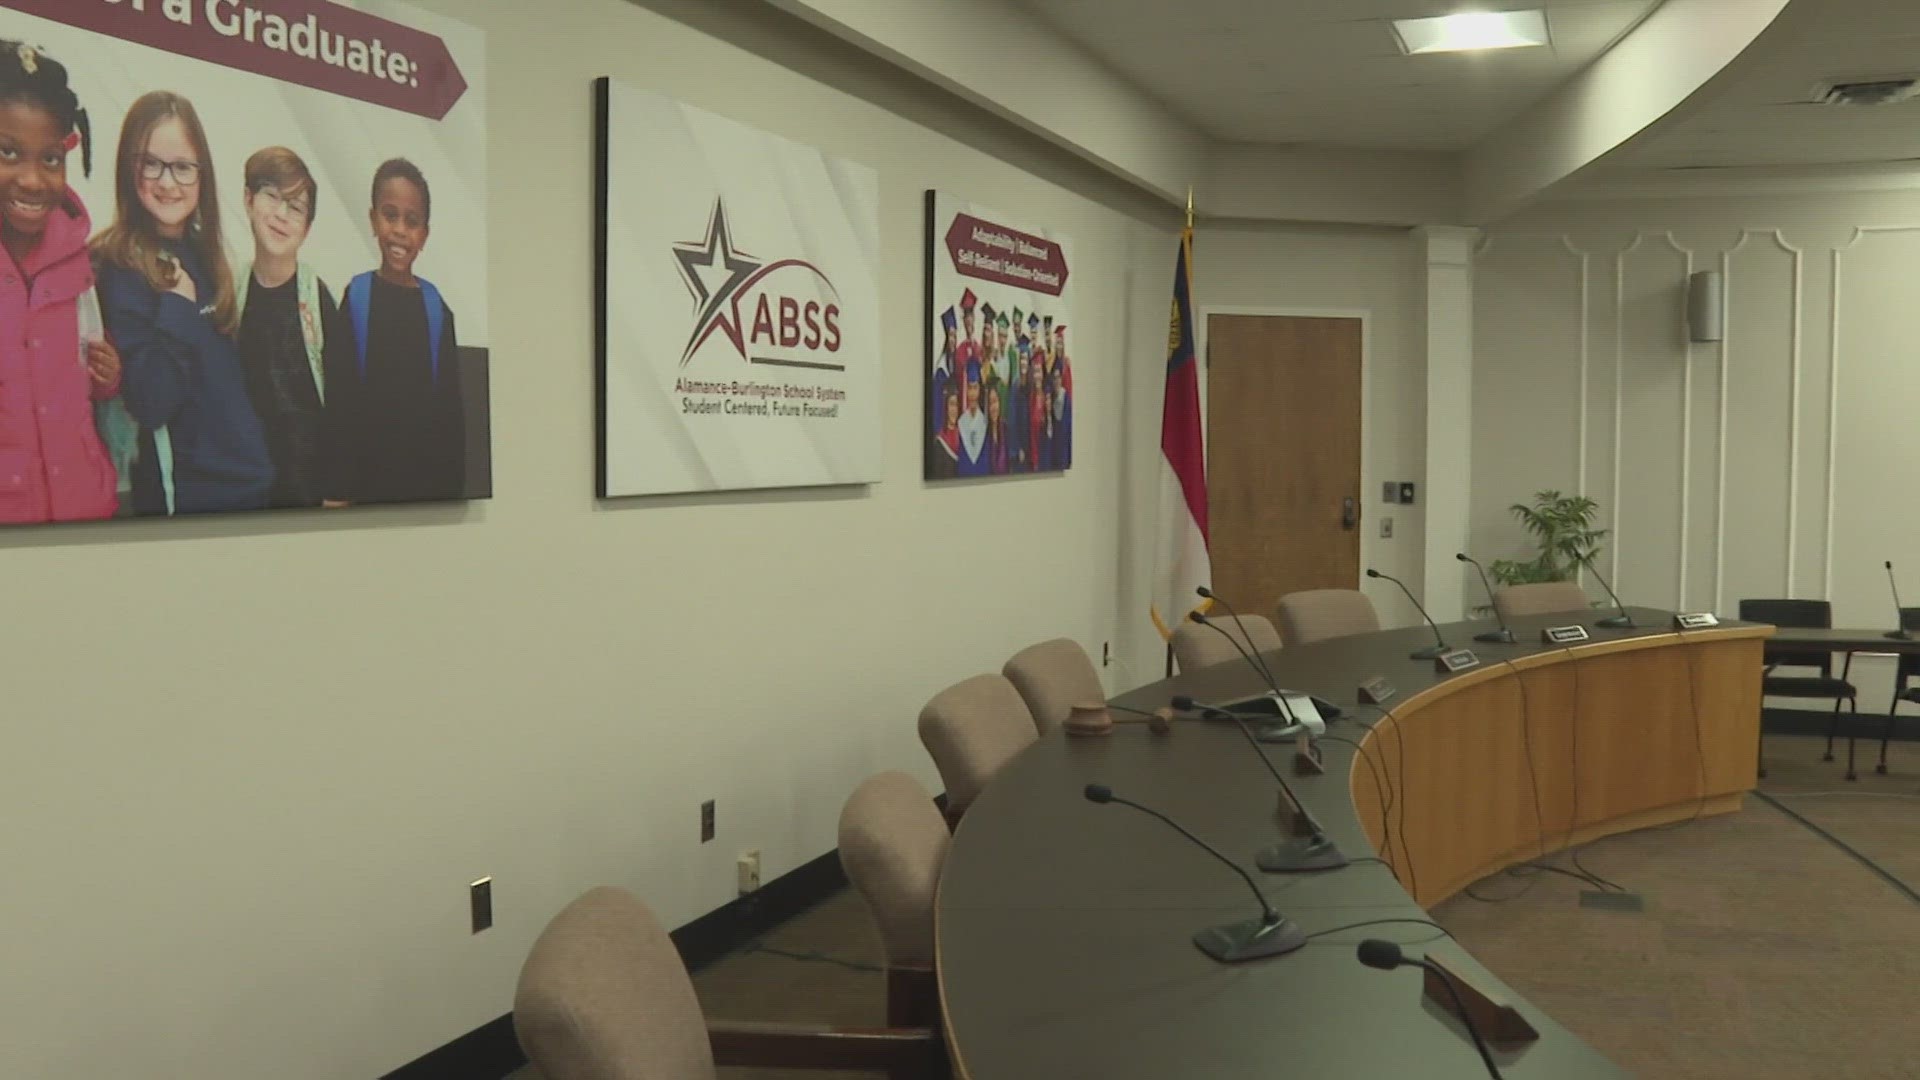 Dr. Dain Butler has resigned from ABSS as Superintendent, according to the district.